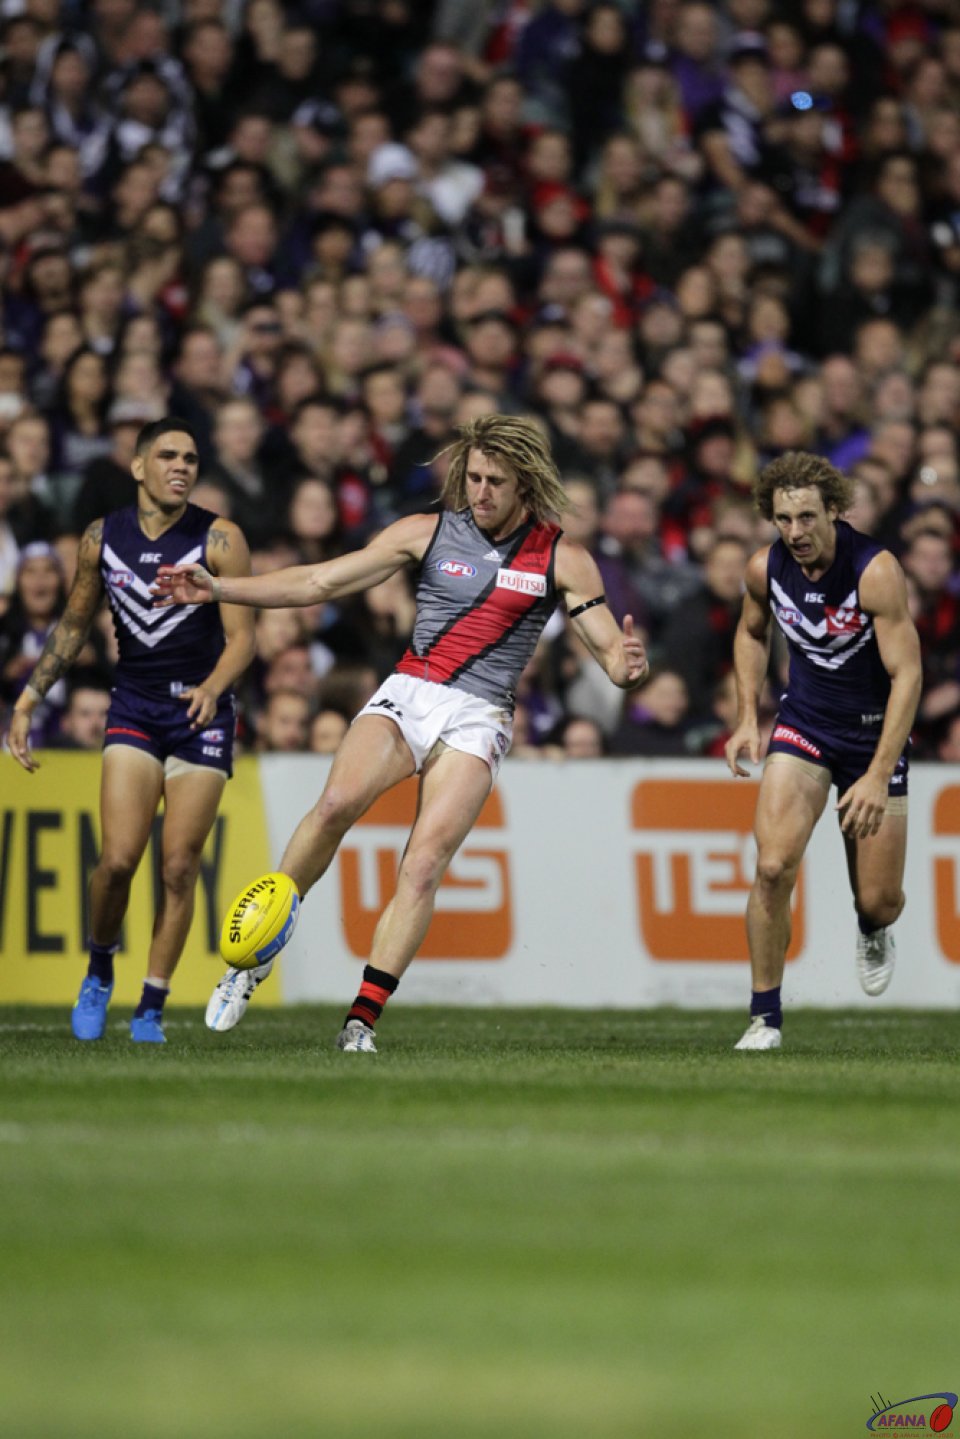 Heppell Clears